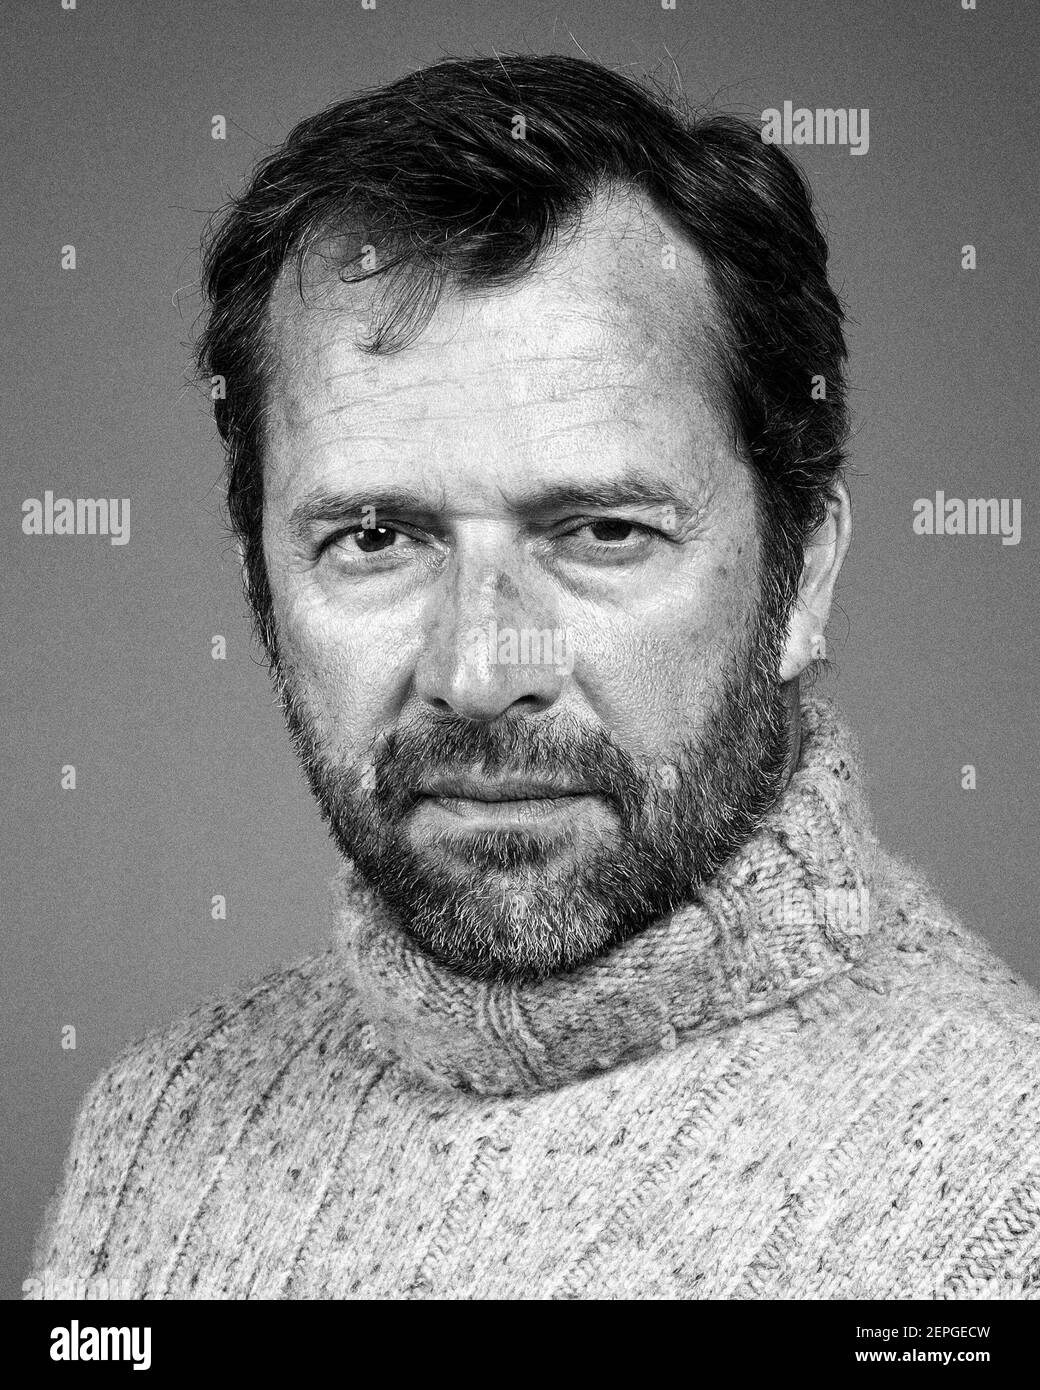 JAMES PUREFOY in FISHERMAN'S FRIENDS (2019), directed by CHRIS FOGGIN. Credit: Fred Films / Powderkeg Pictures / Album Stock Photo